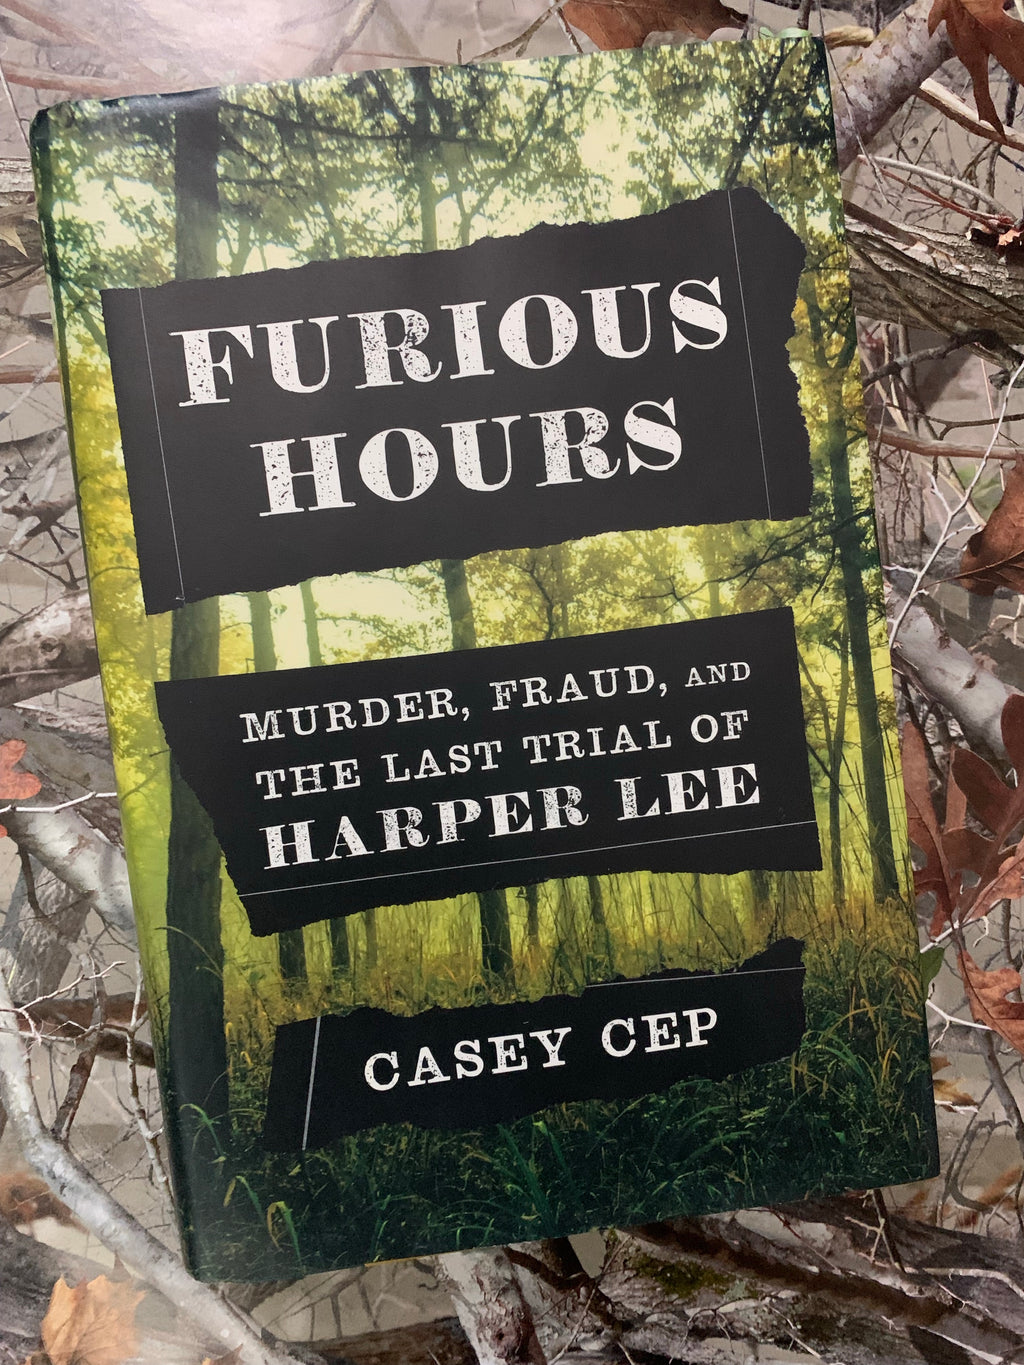 Furious Hours: Murder, Fraud, and the Last Trial of Harper Lee- By Casey Cep